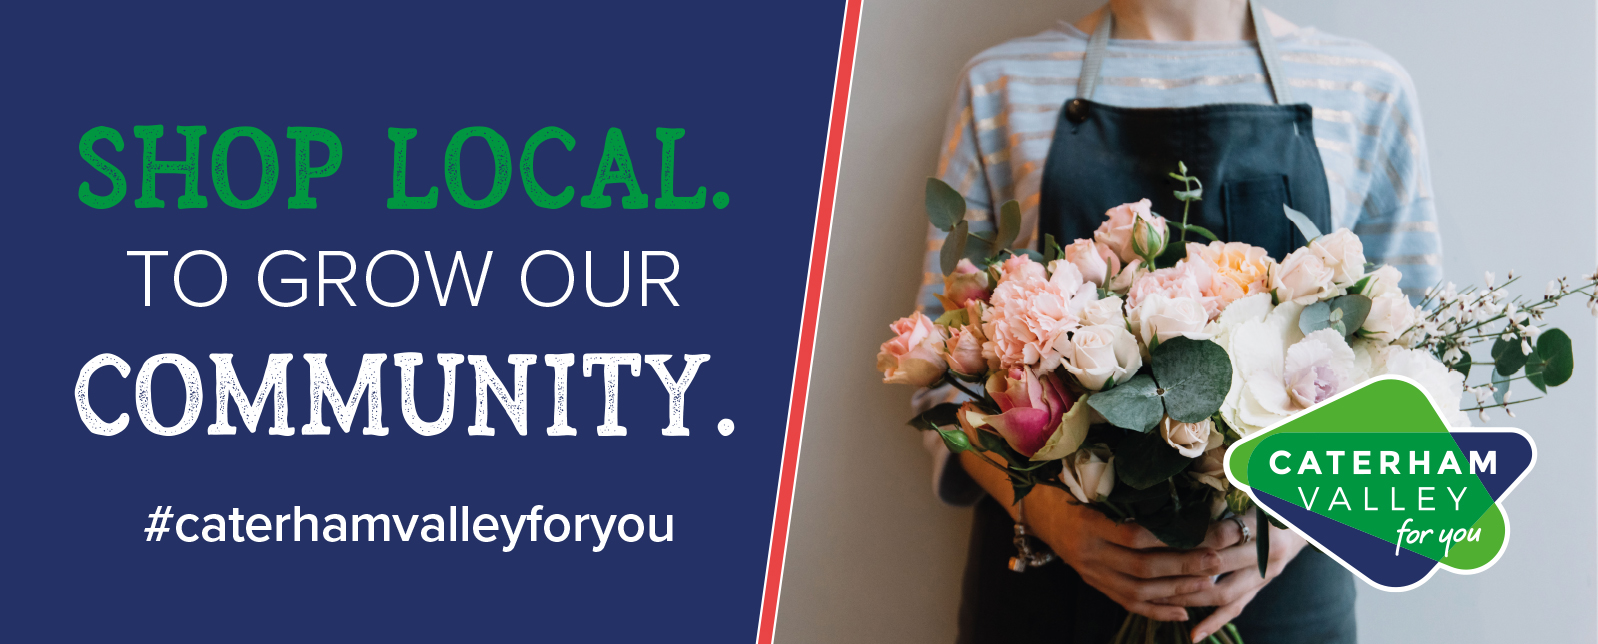 Shop Local - Grow your community